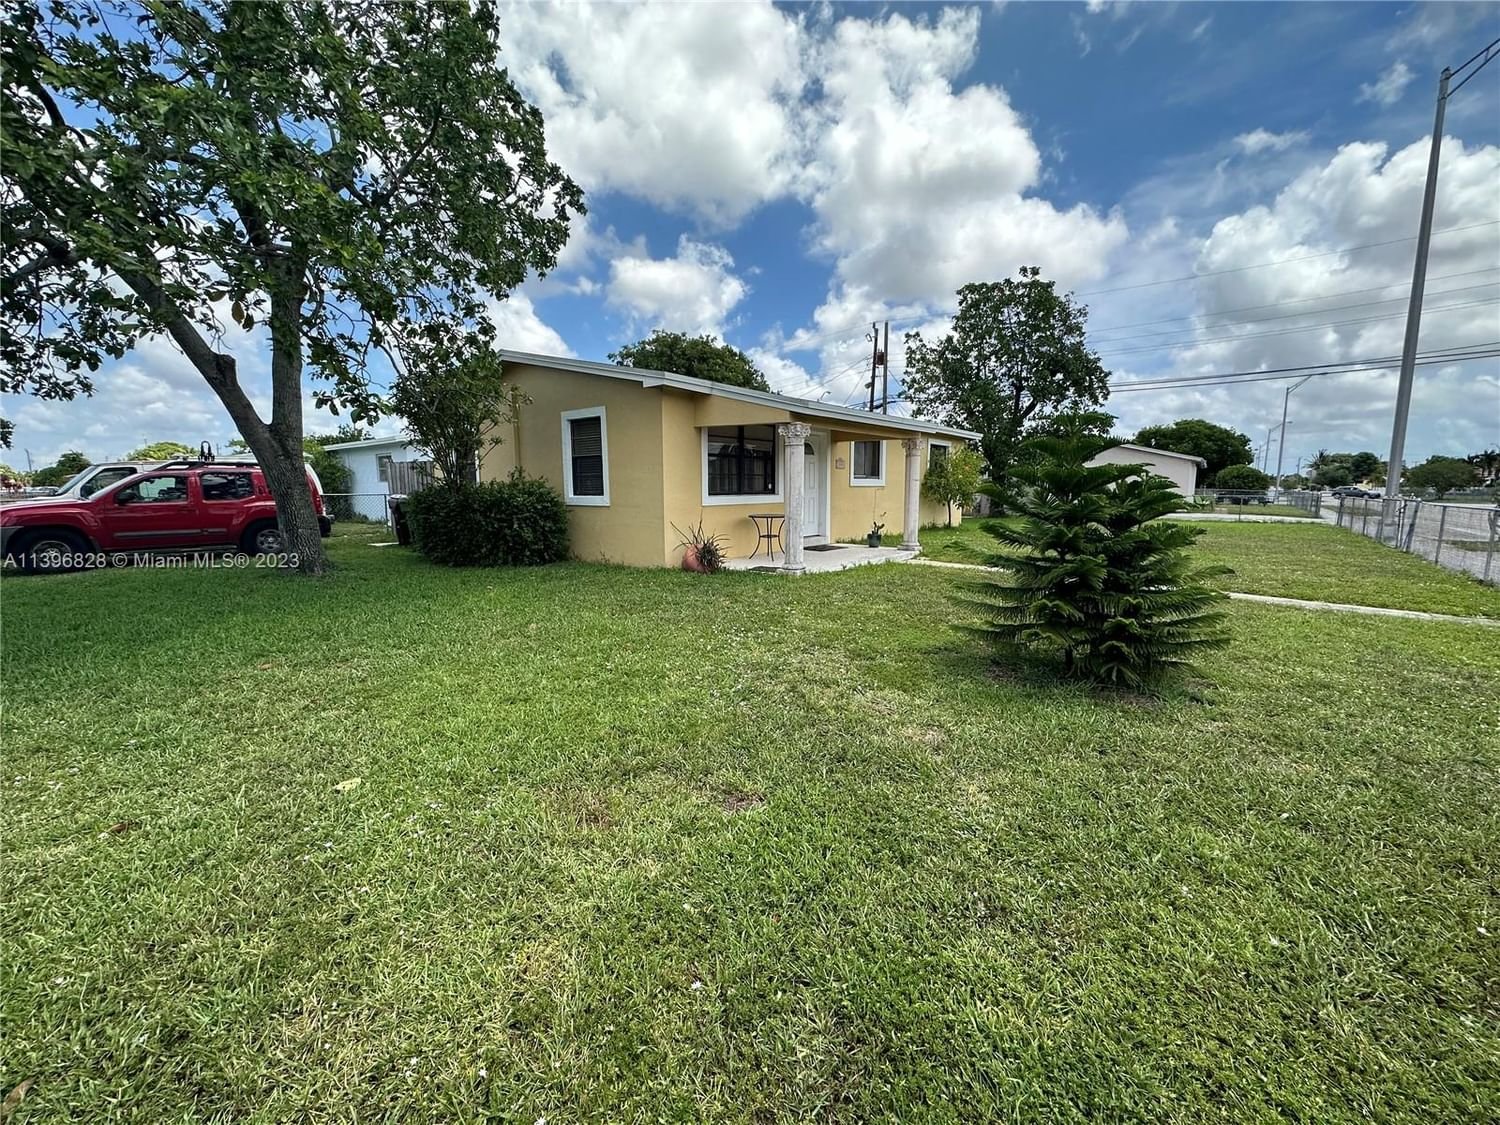 Real estate property located at 3401 14th Ct, Miami-Dade County, FLA FRUIT LAND CO SUB, Hialeah, FL